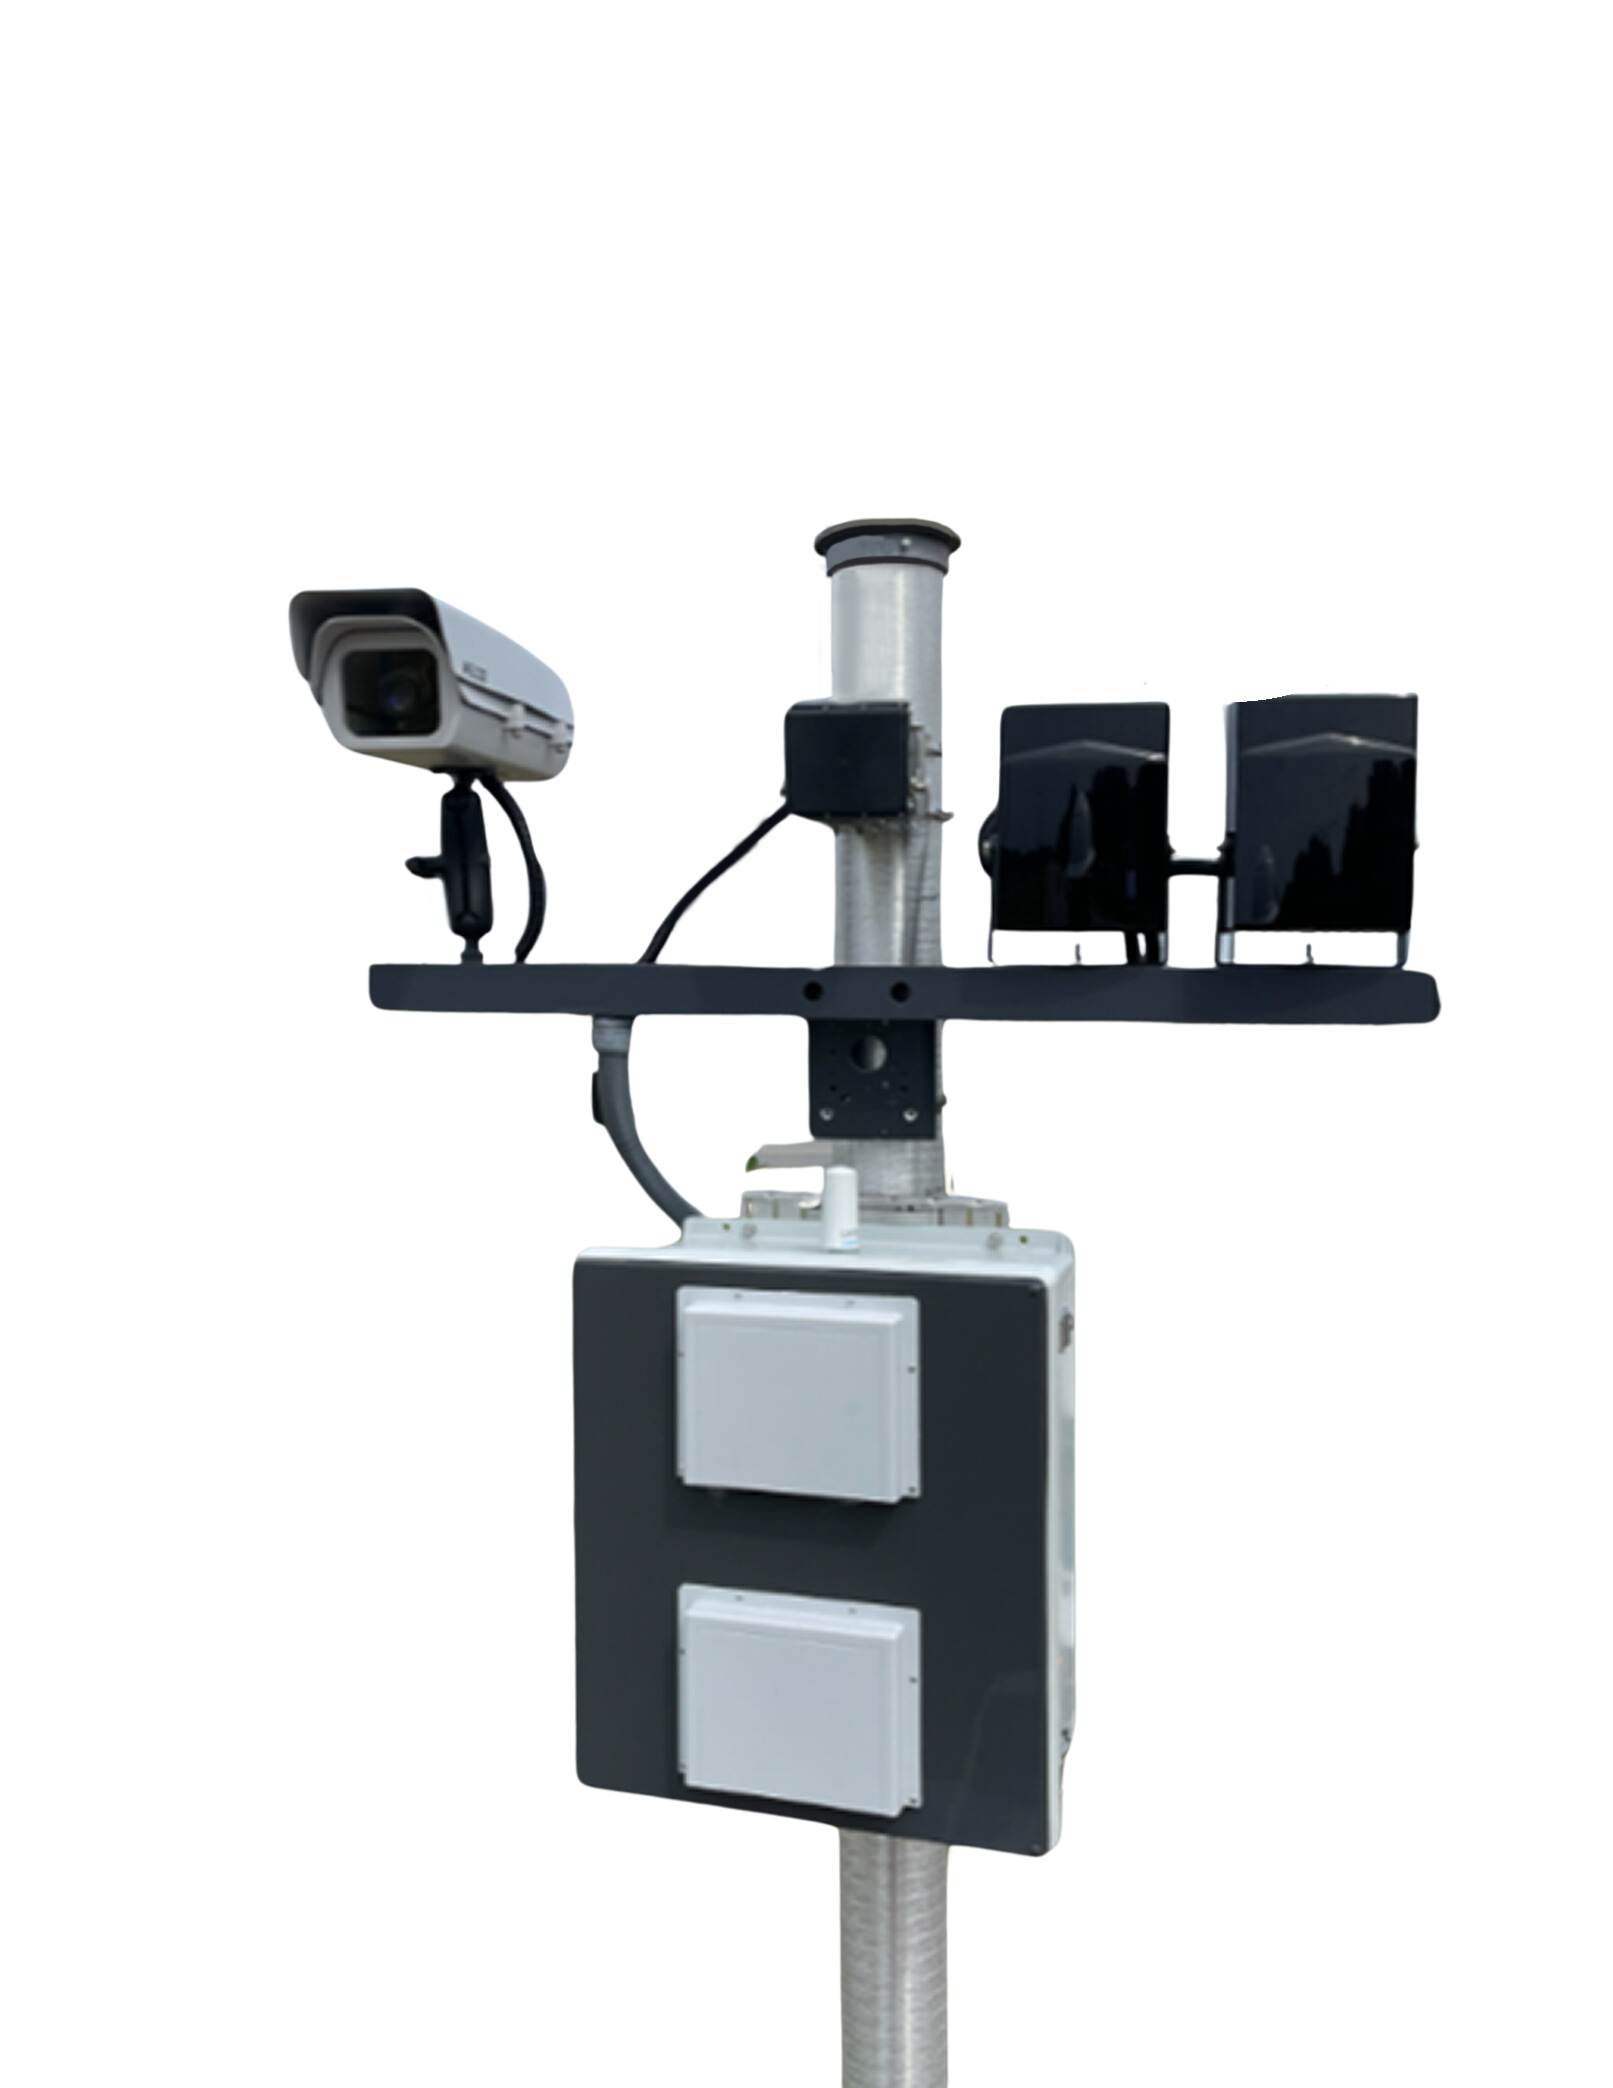 Altumint Launches Cutting-Edge Viocam Vision System Designed to Support Law Enforcement